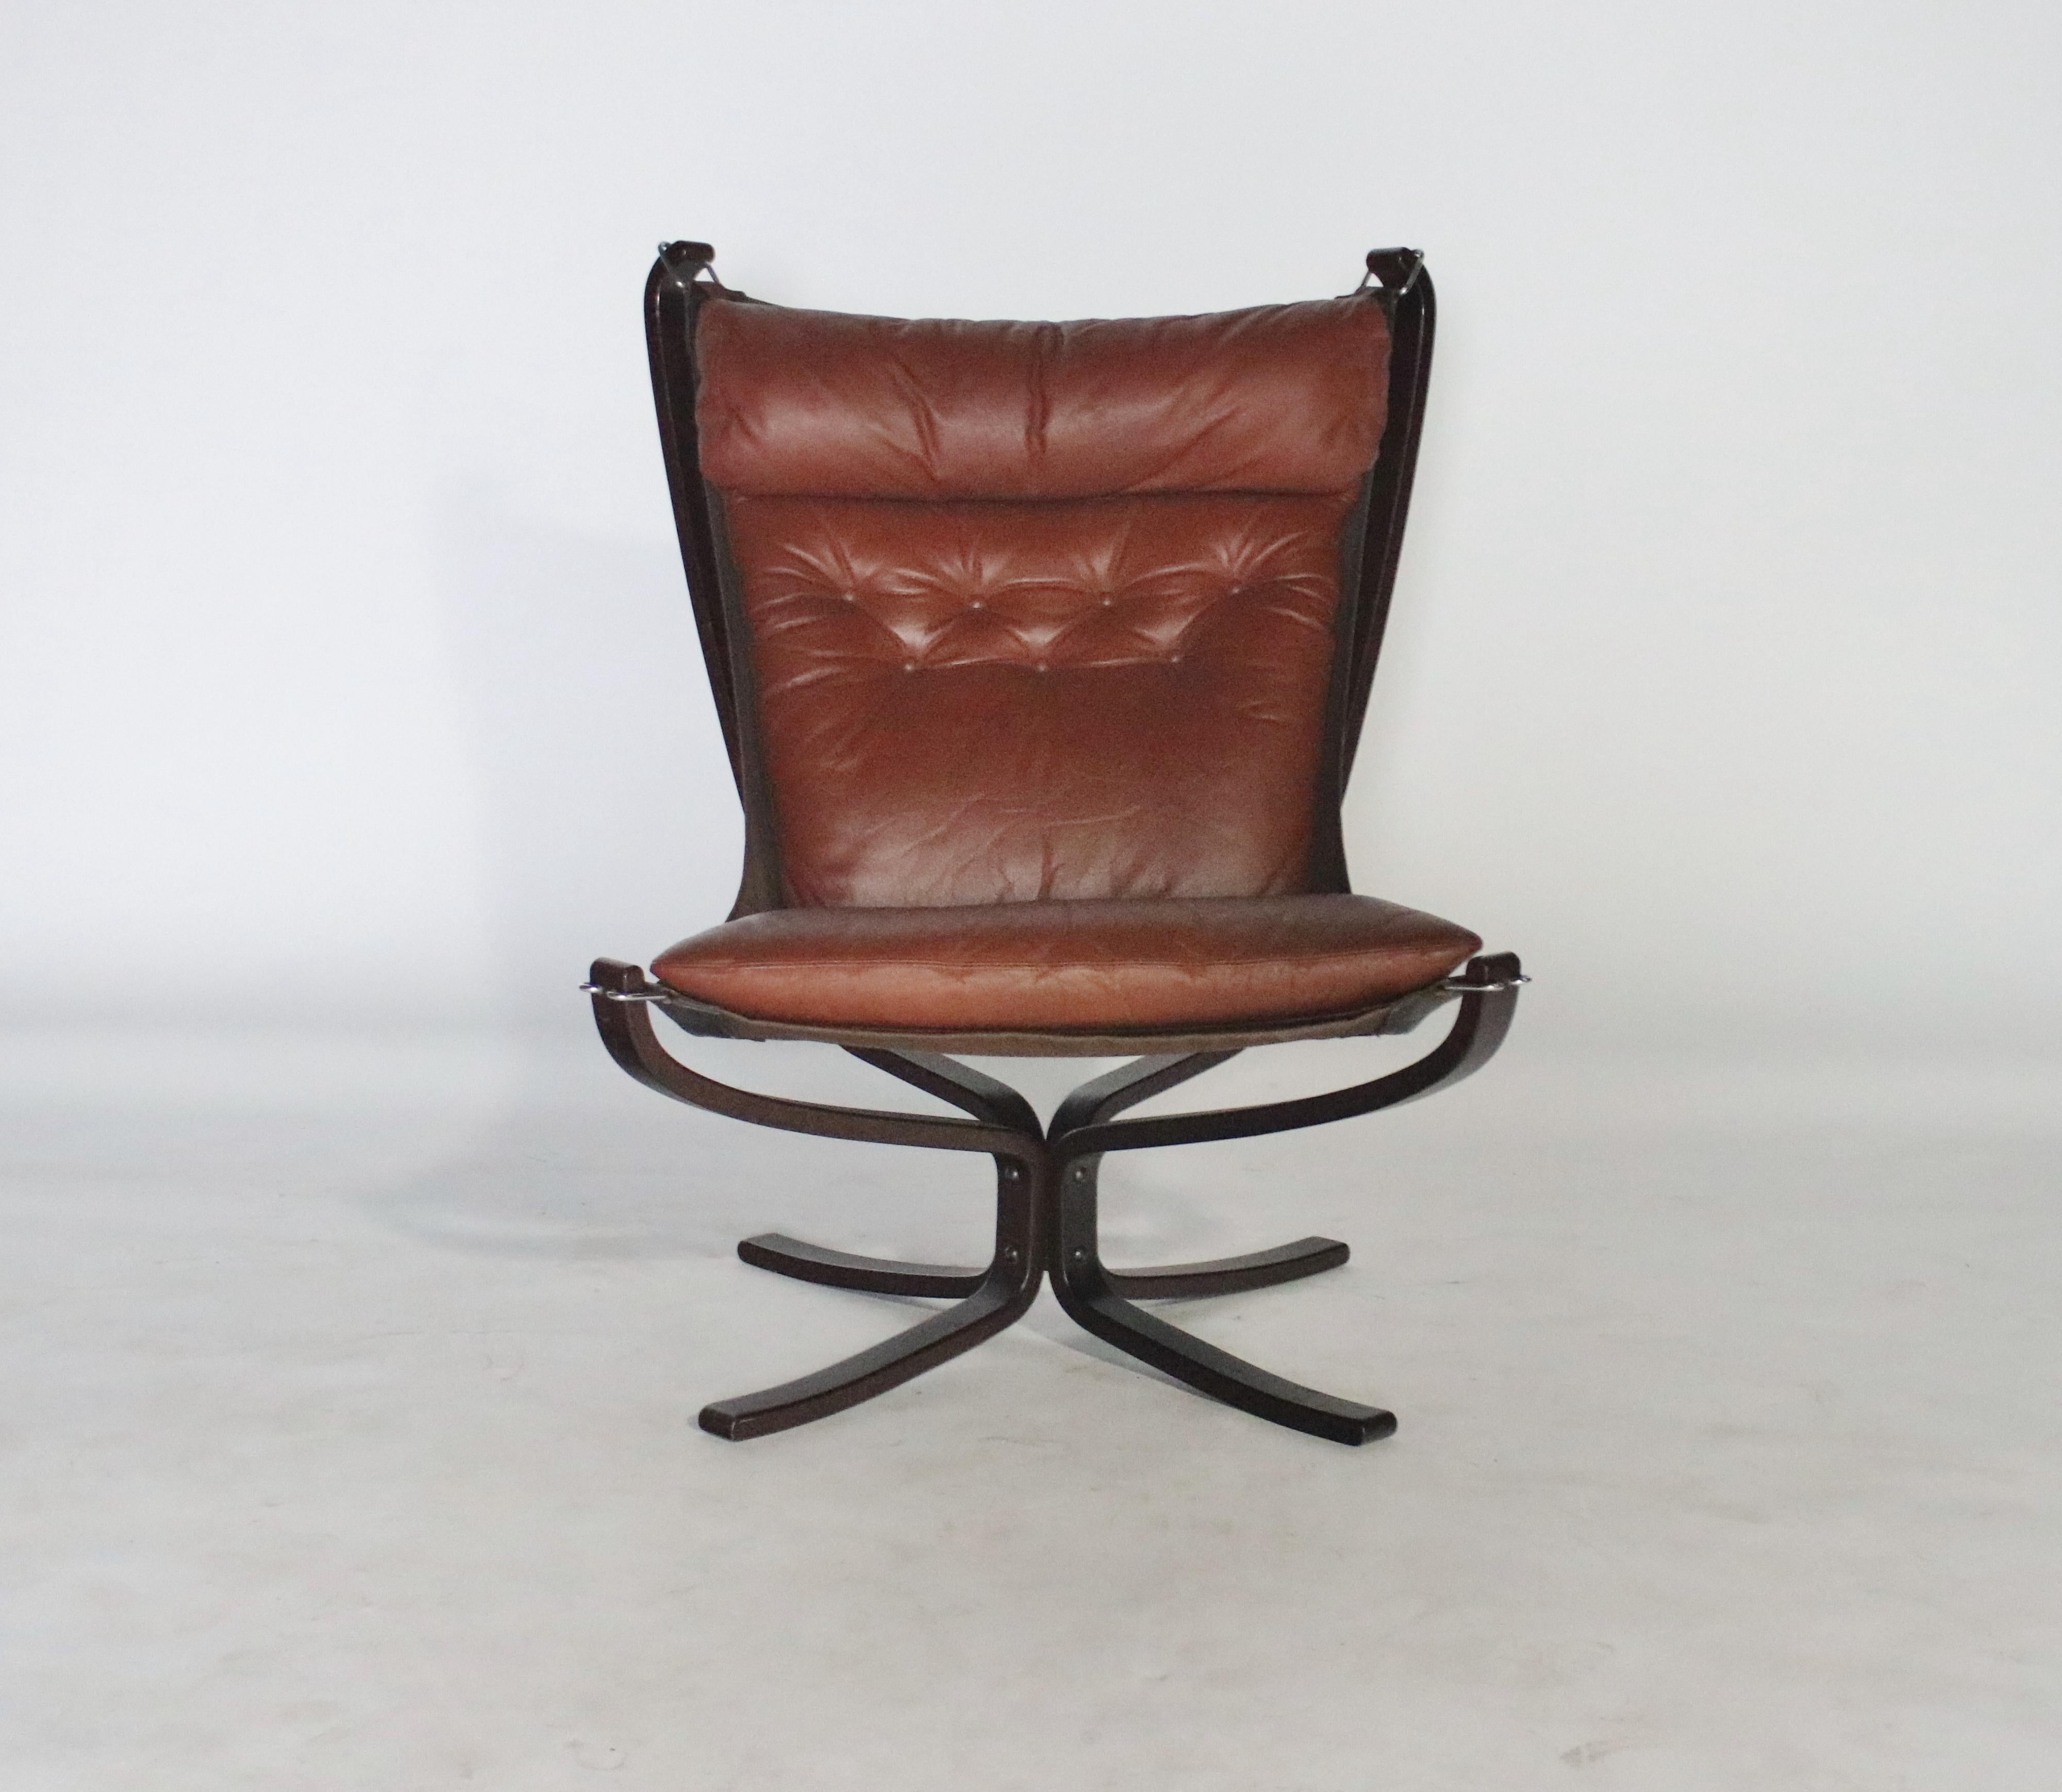 Brown leather Falcon chair designed by Sigurd Ressel for Vatne Mobler, 1970s. All original chair in very good condition with reconditioned brown leather and all tufting in tact. A canvas hammock-style canvas sling hangs from the stained beechwood